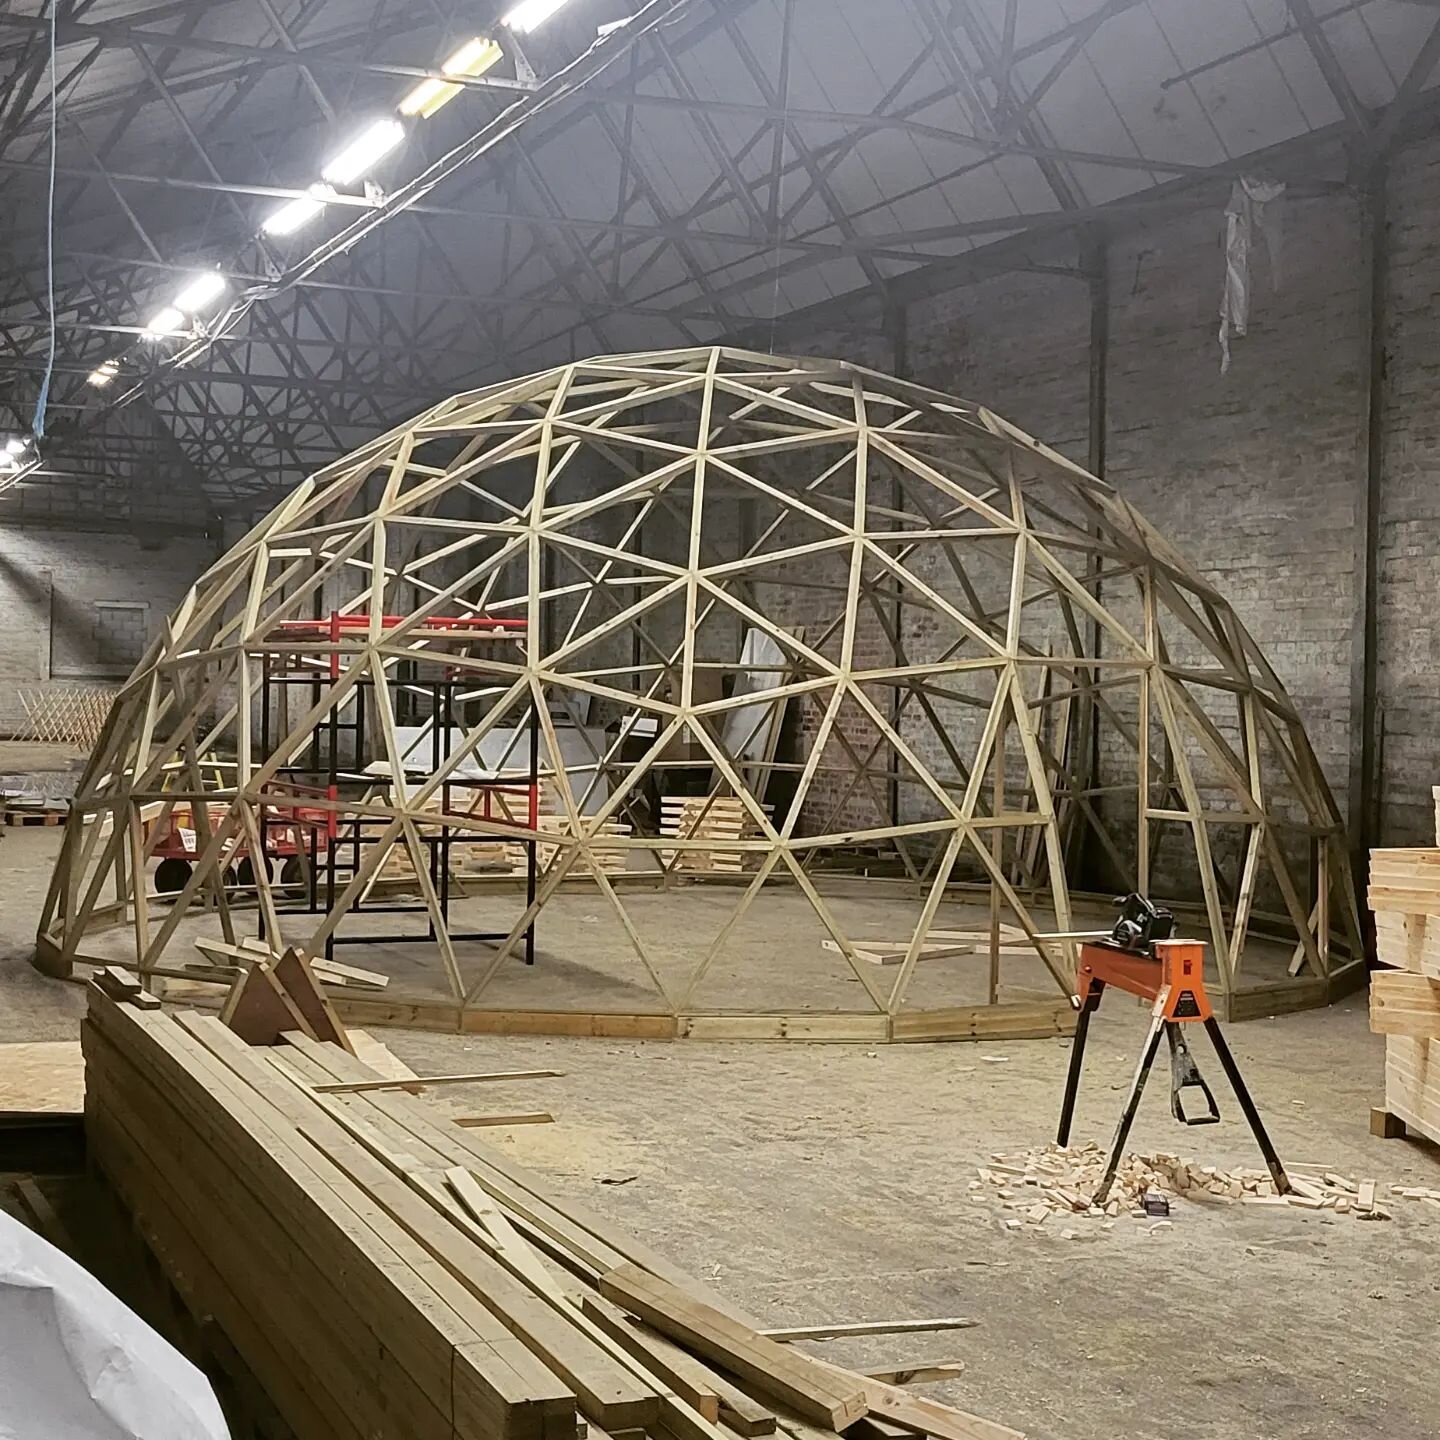 Still for sale if anyone is interested? 5v 8m Diameter Geodesic Dome frame. Buyer to collect or delivery available at cost. Full instructions can be given how to reassemble. Great DIY project for someone. Contact us for more details. 

#geodesicdome 